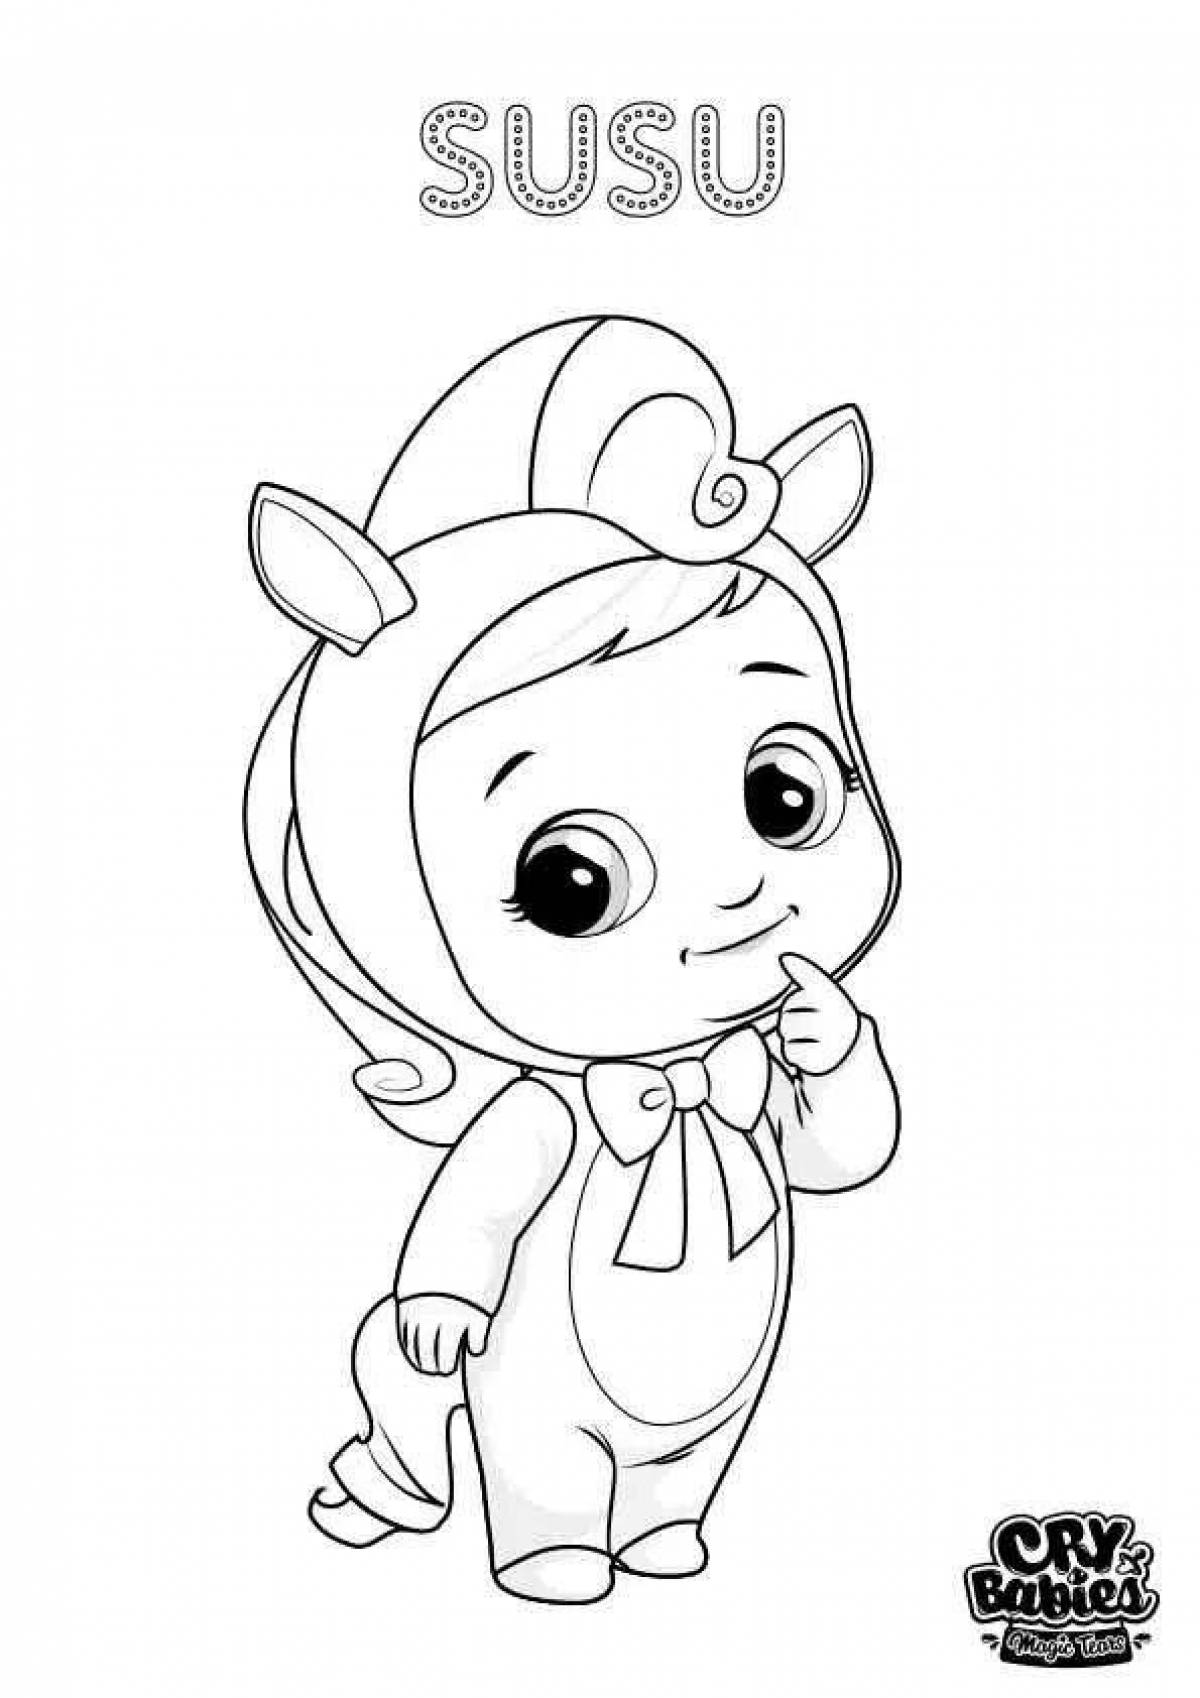 Fairytale crybaby coloring book